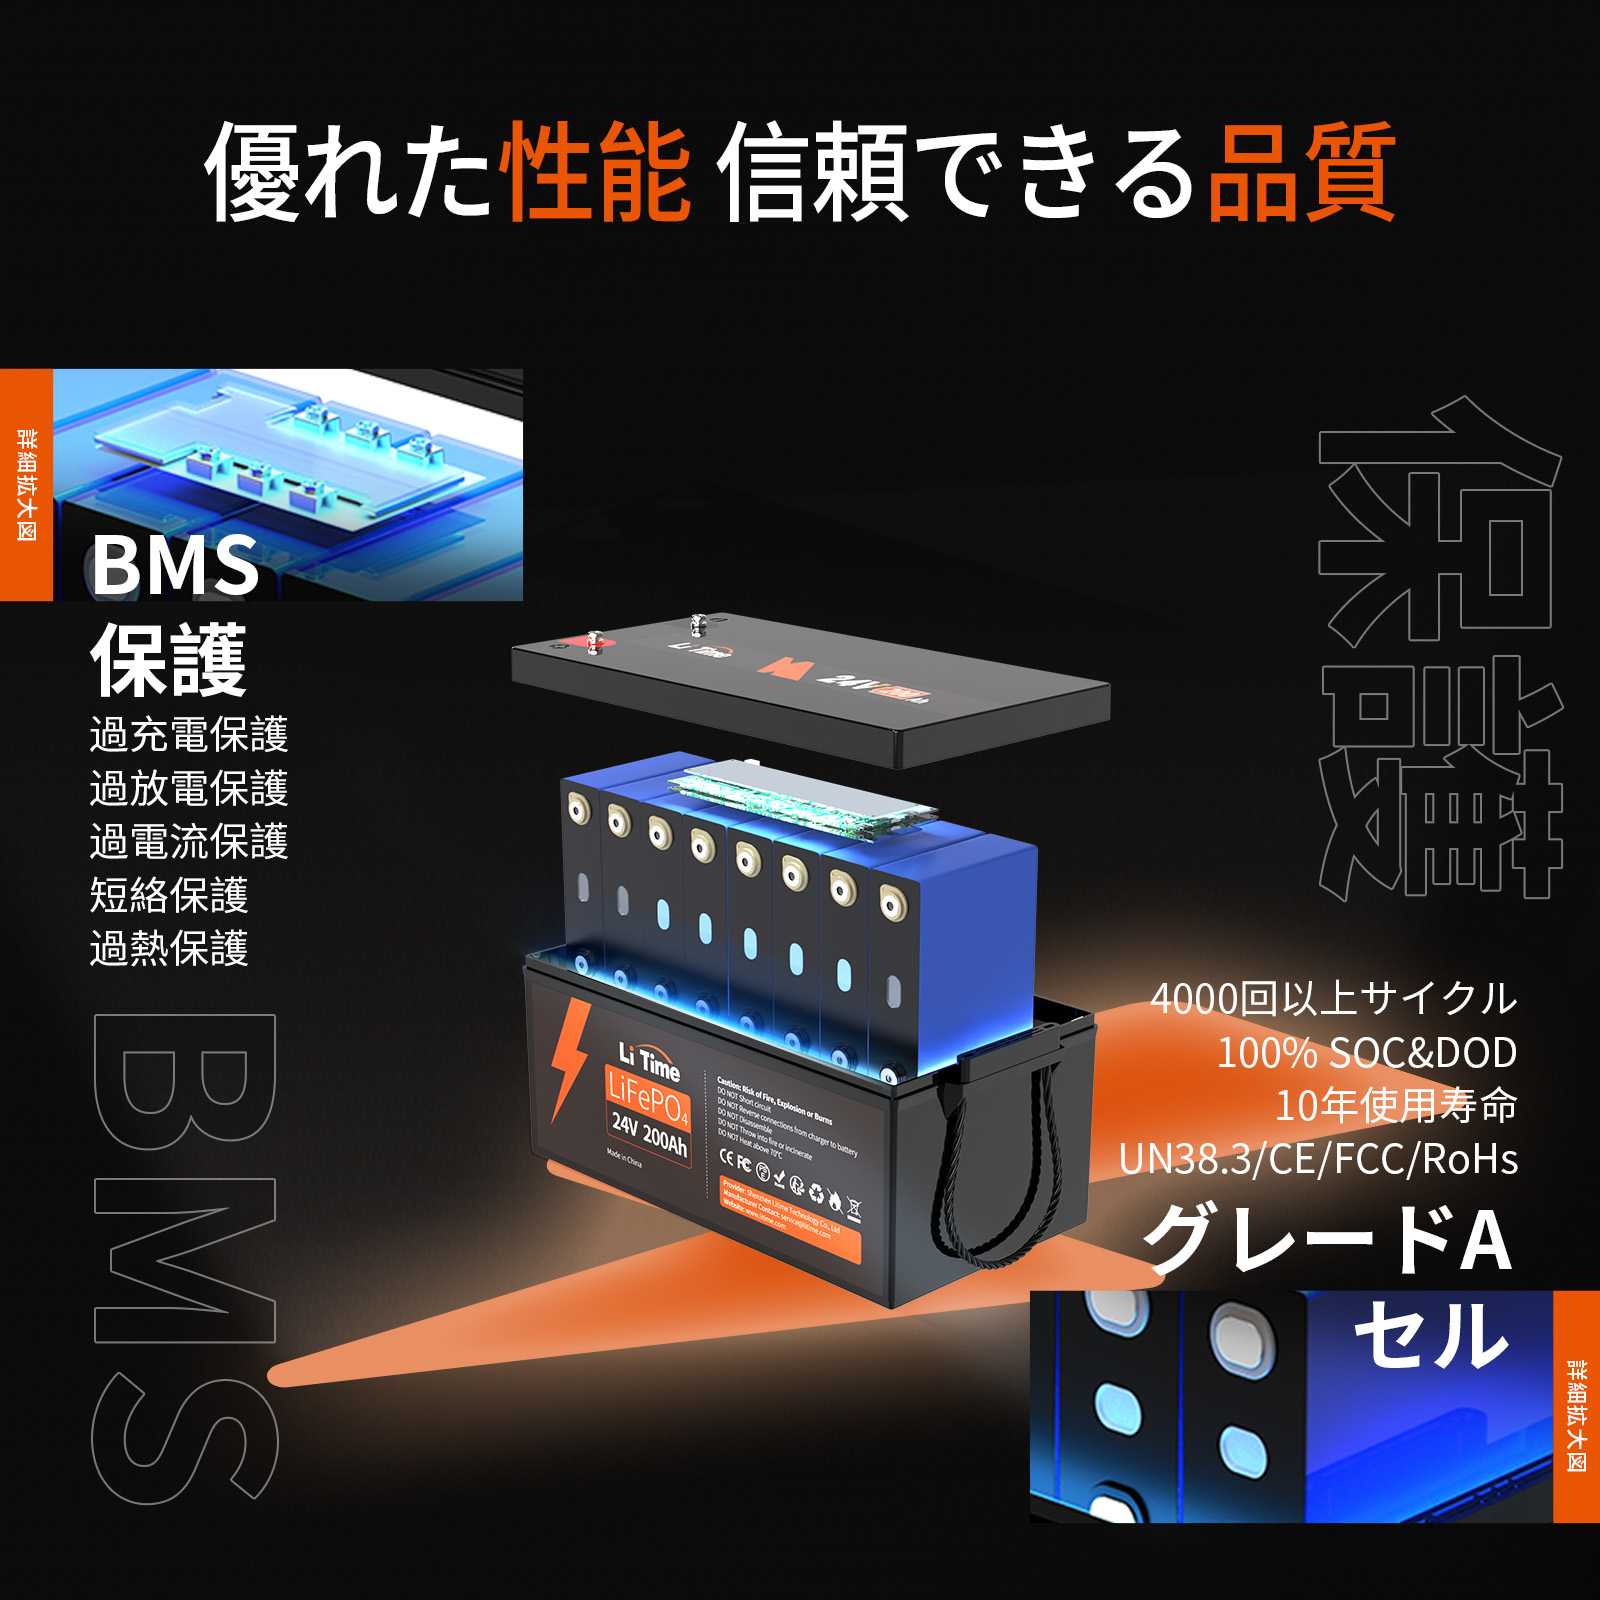 LiTime「Ampere Time 」 24V200Ah リン酸鉄リチウムイオンバッテリー 5120Wh LiFePO4 バッテリー ampere time